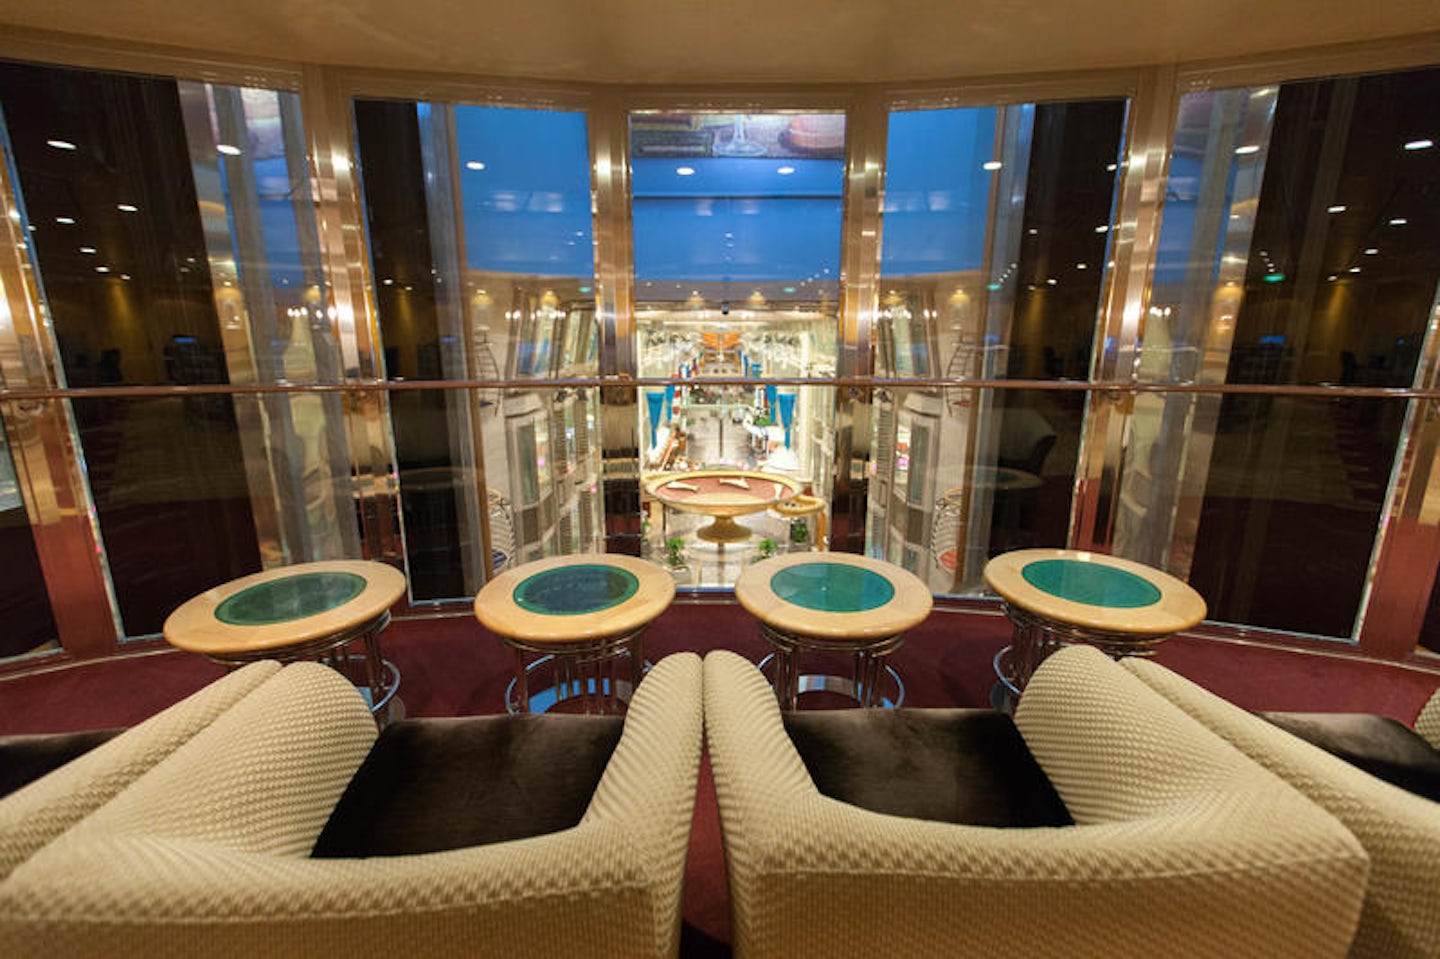 Royal Caribbean Online on Independence of the Seas